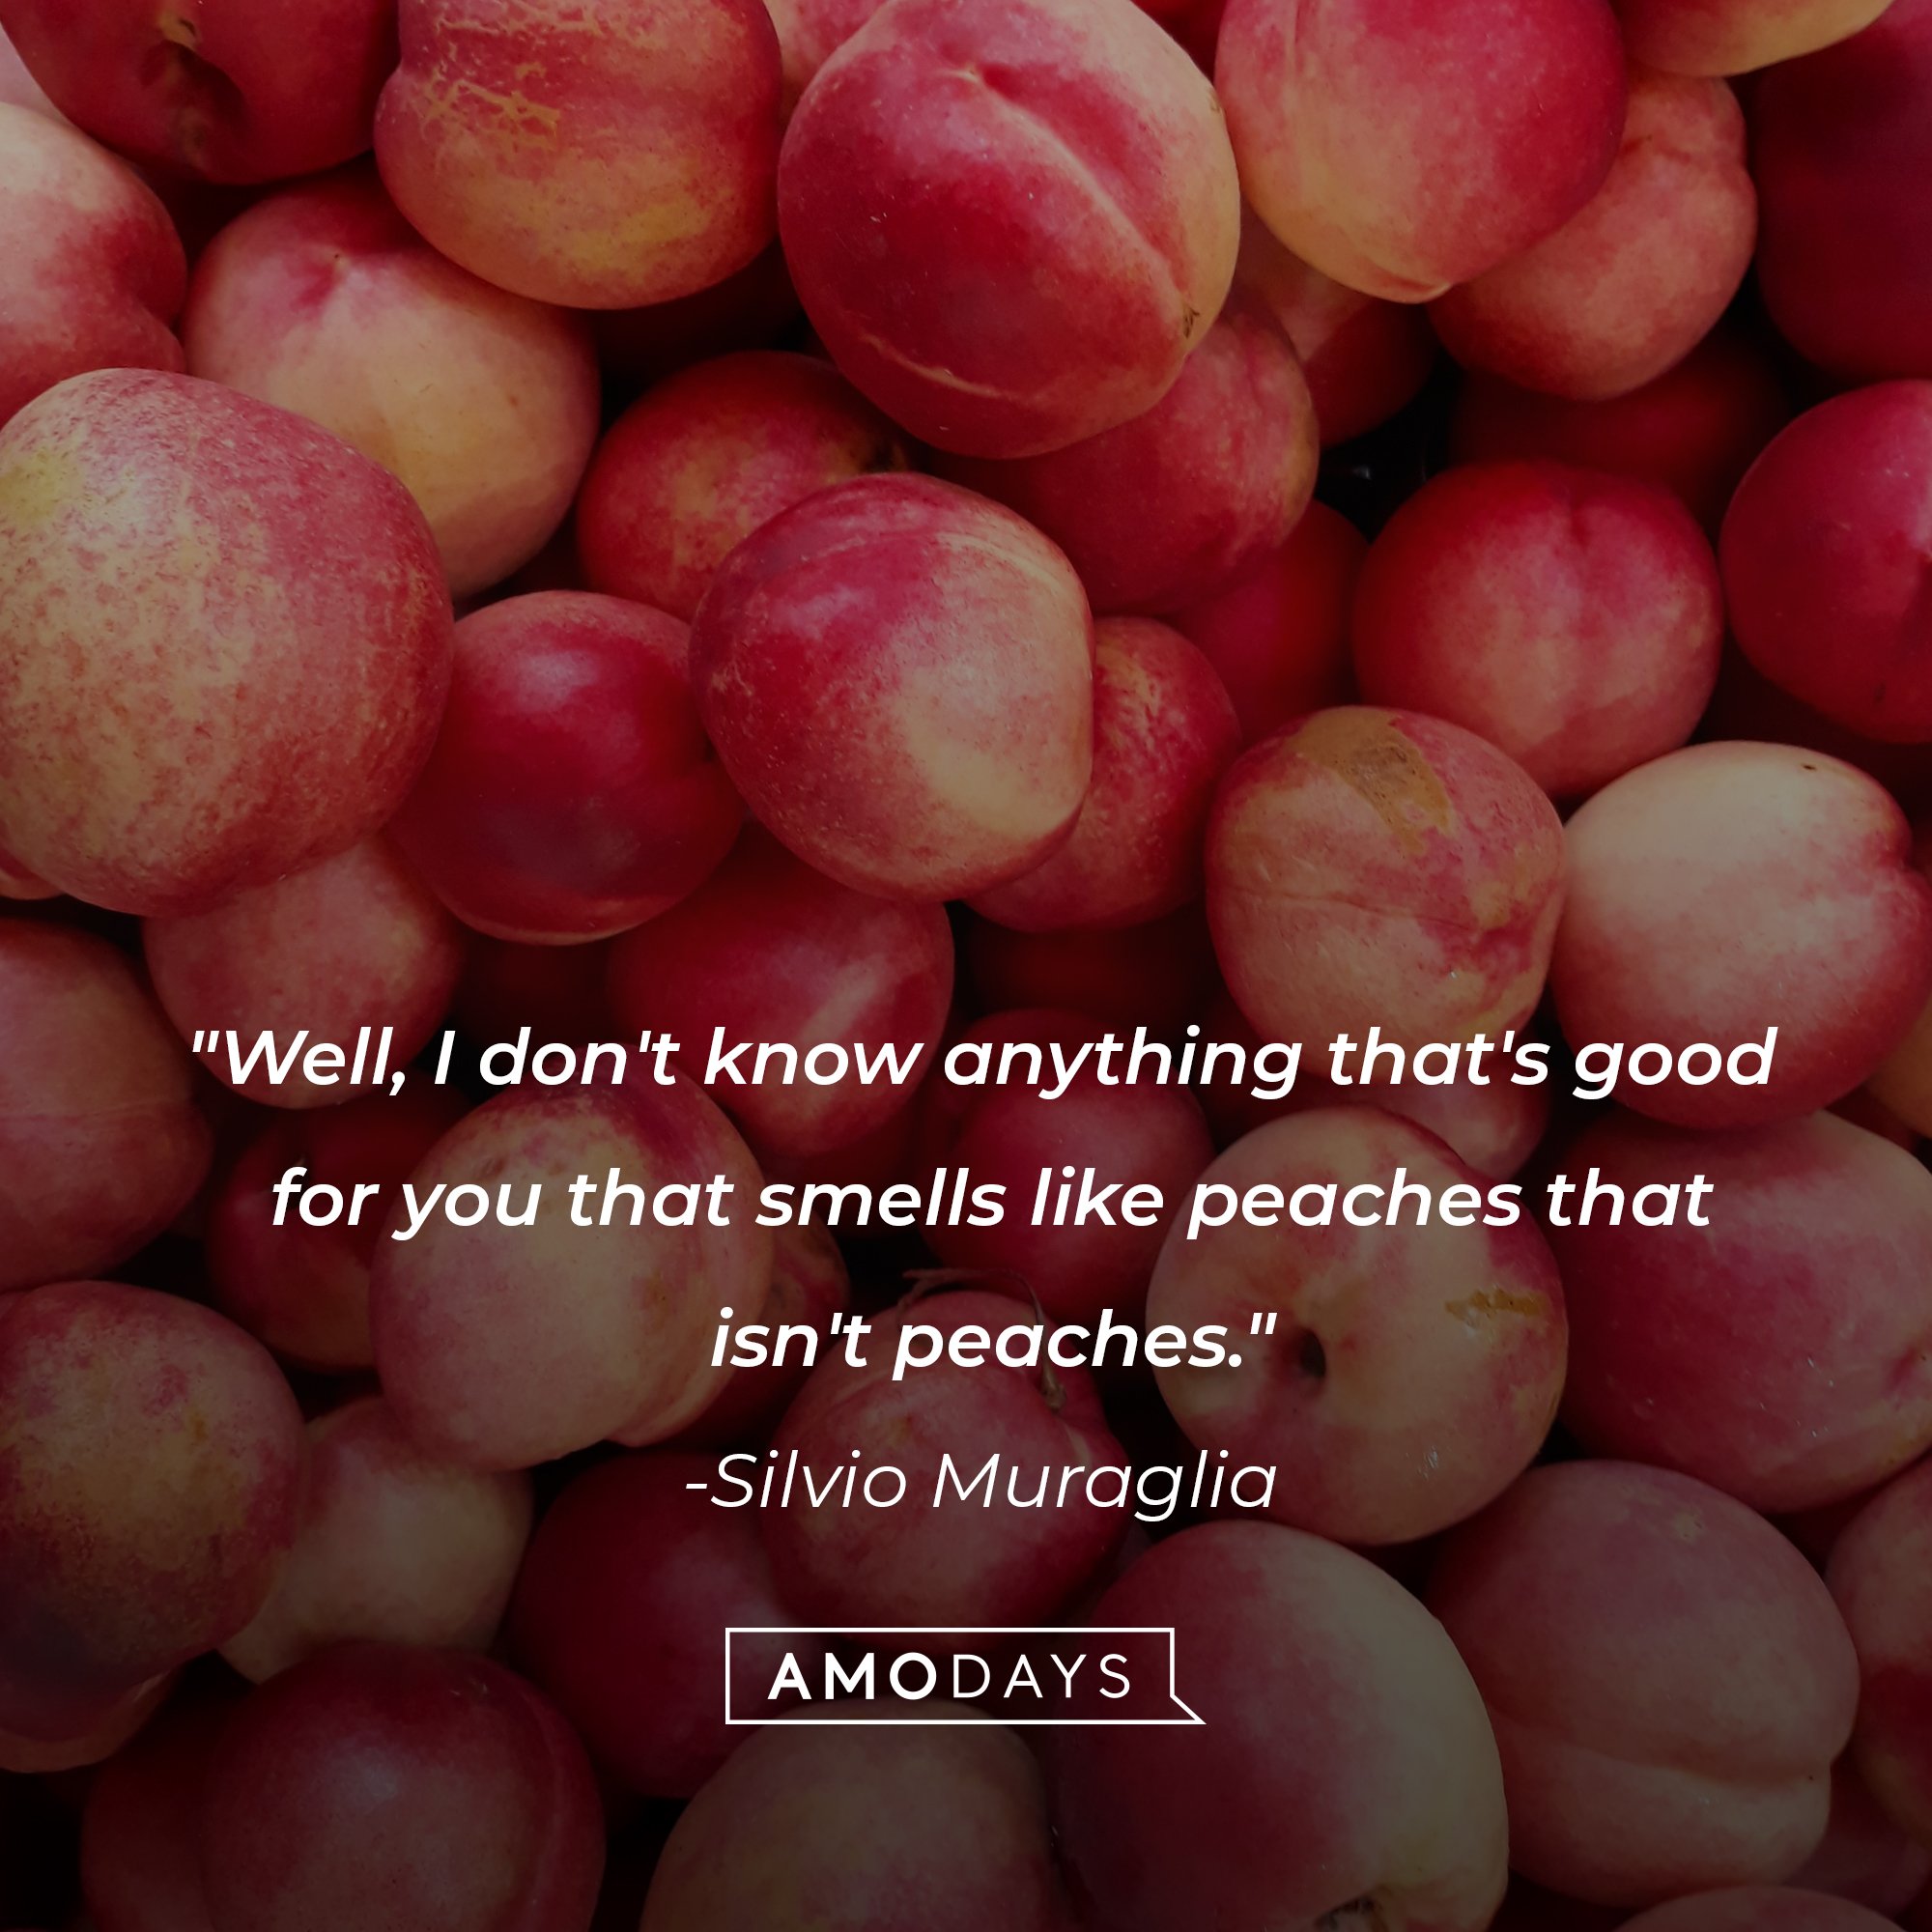 Silvio Muraglia's quote: "Well, I don't know anything that's good for you that smells like peaches that isn't peaches." | Image: AmoDays